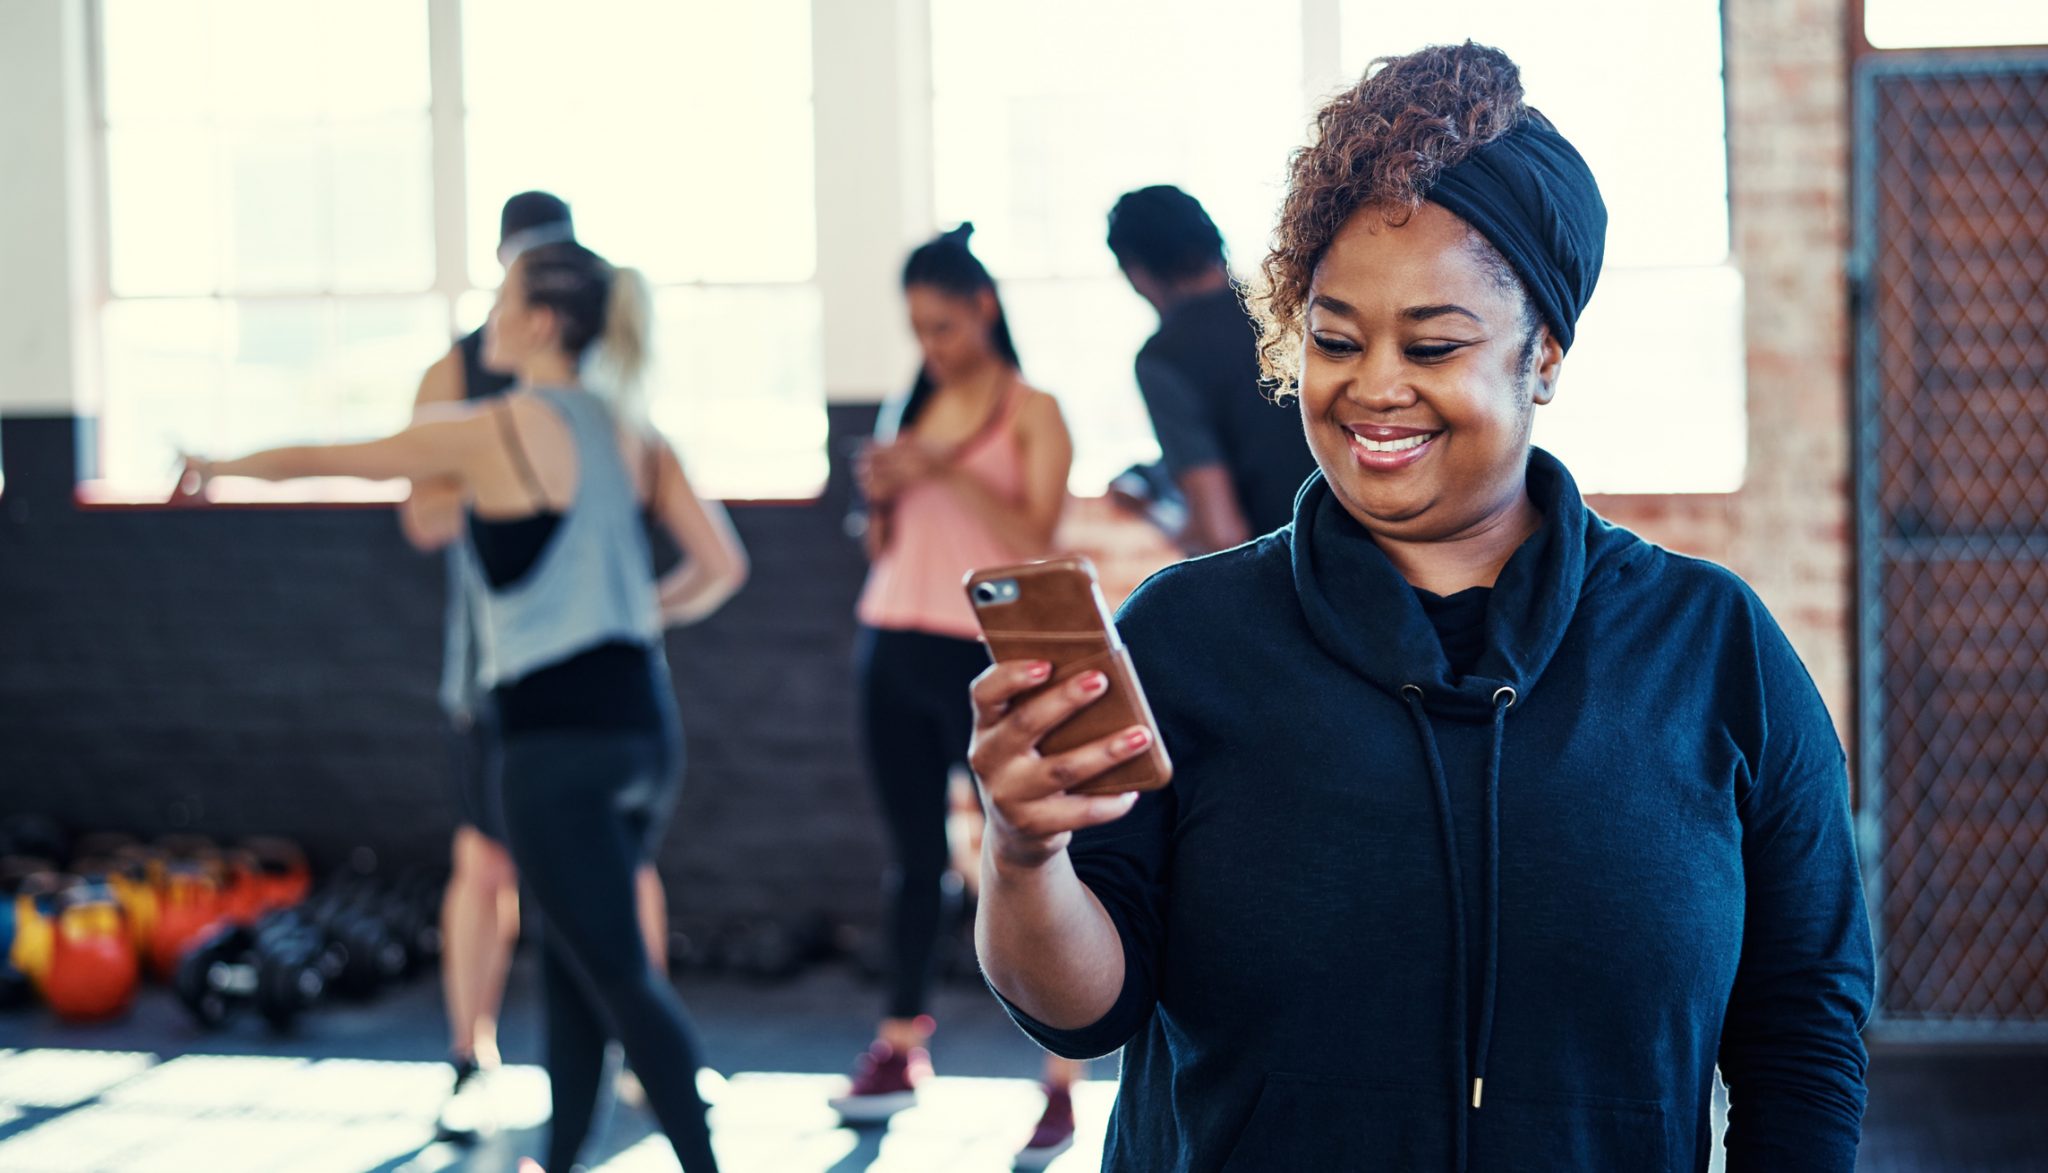 Woman looking at her phone and smiling before an exercise class